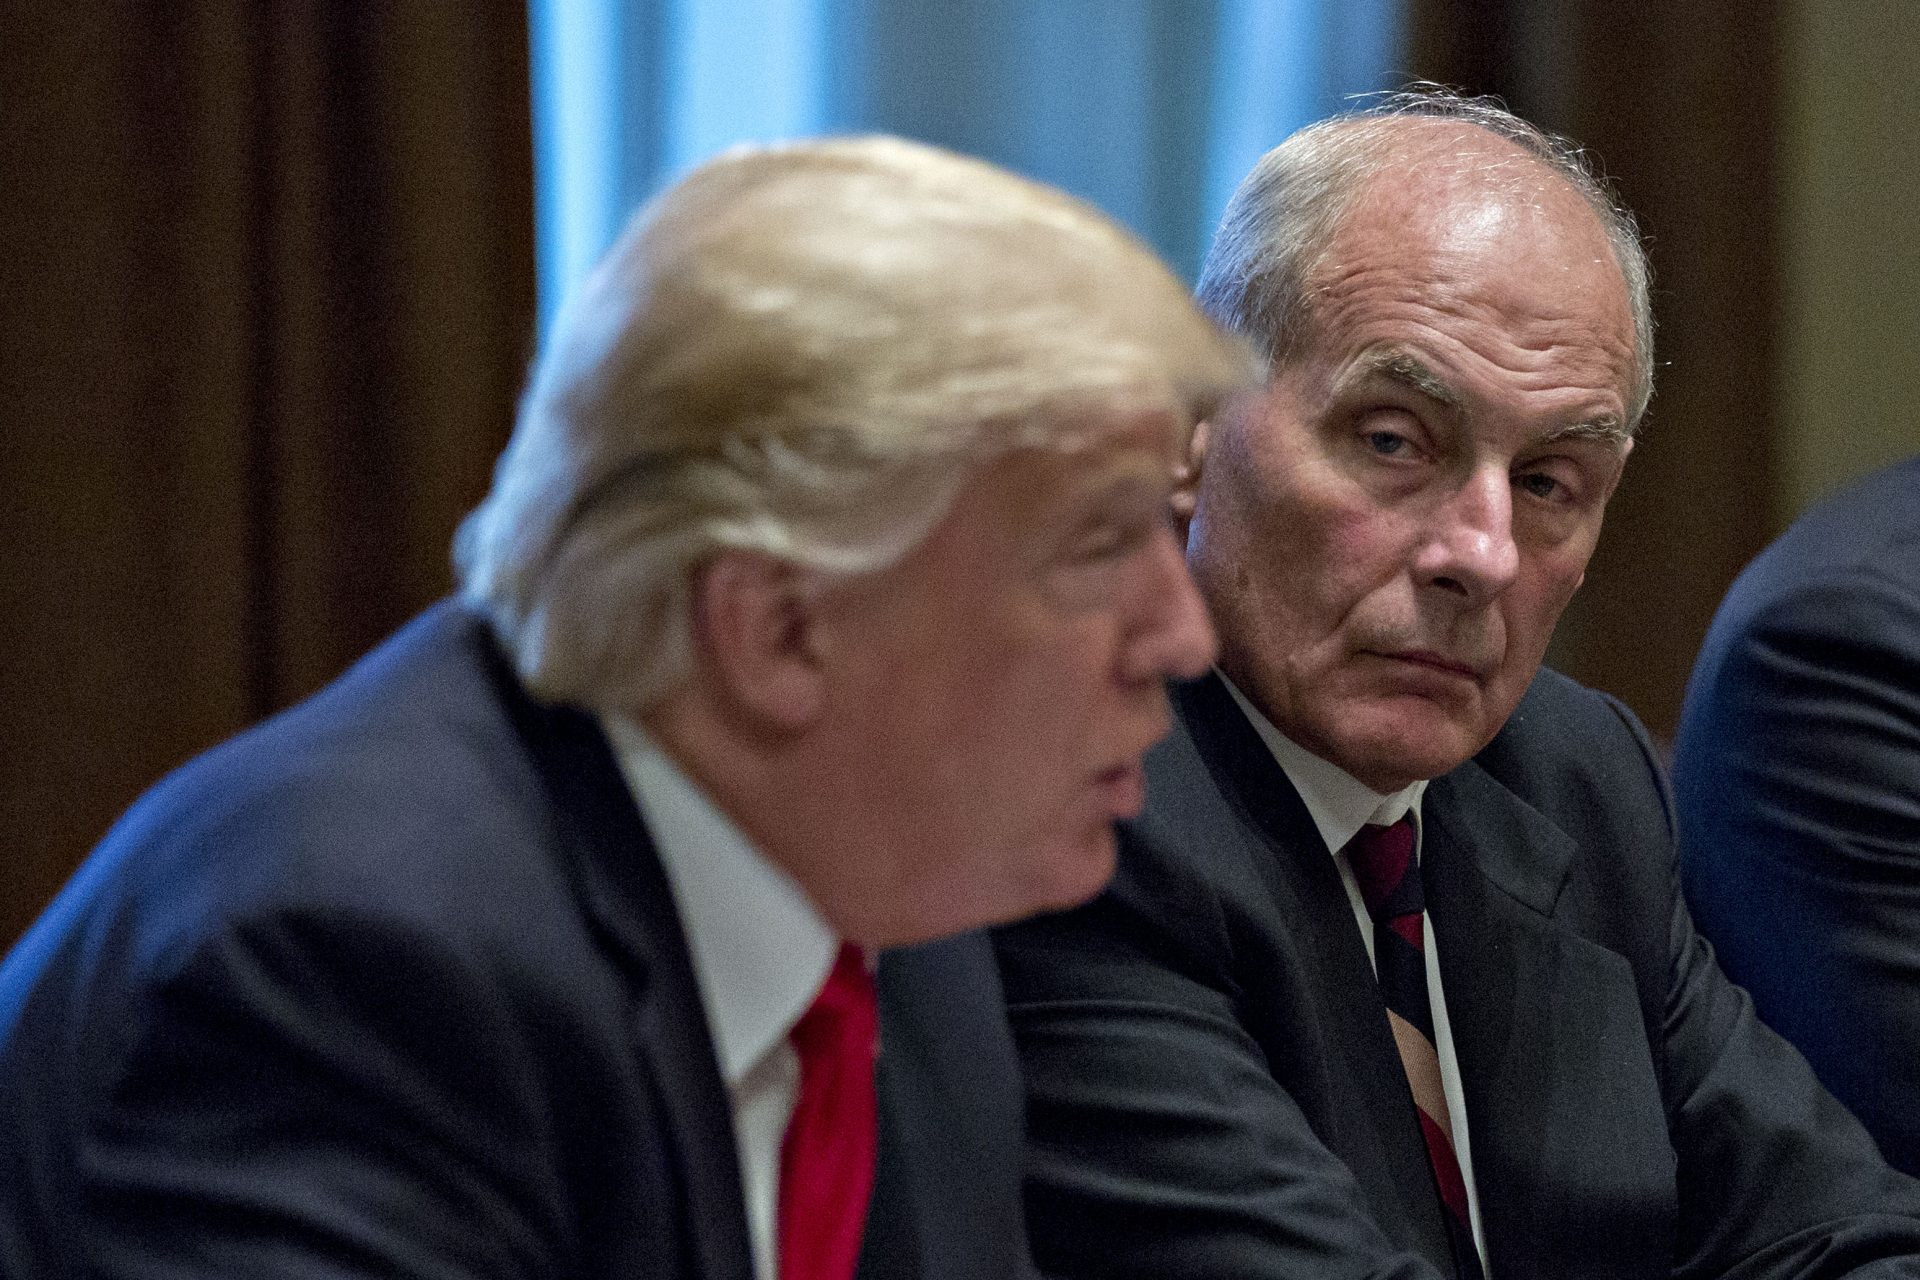 Trump’s former Chief of Staff confirms his contempt for the US military